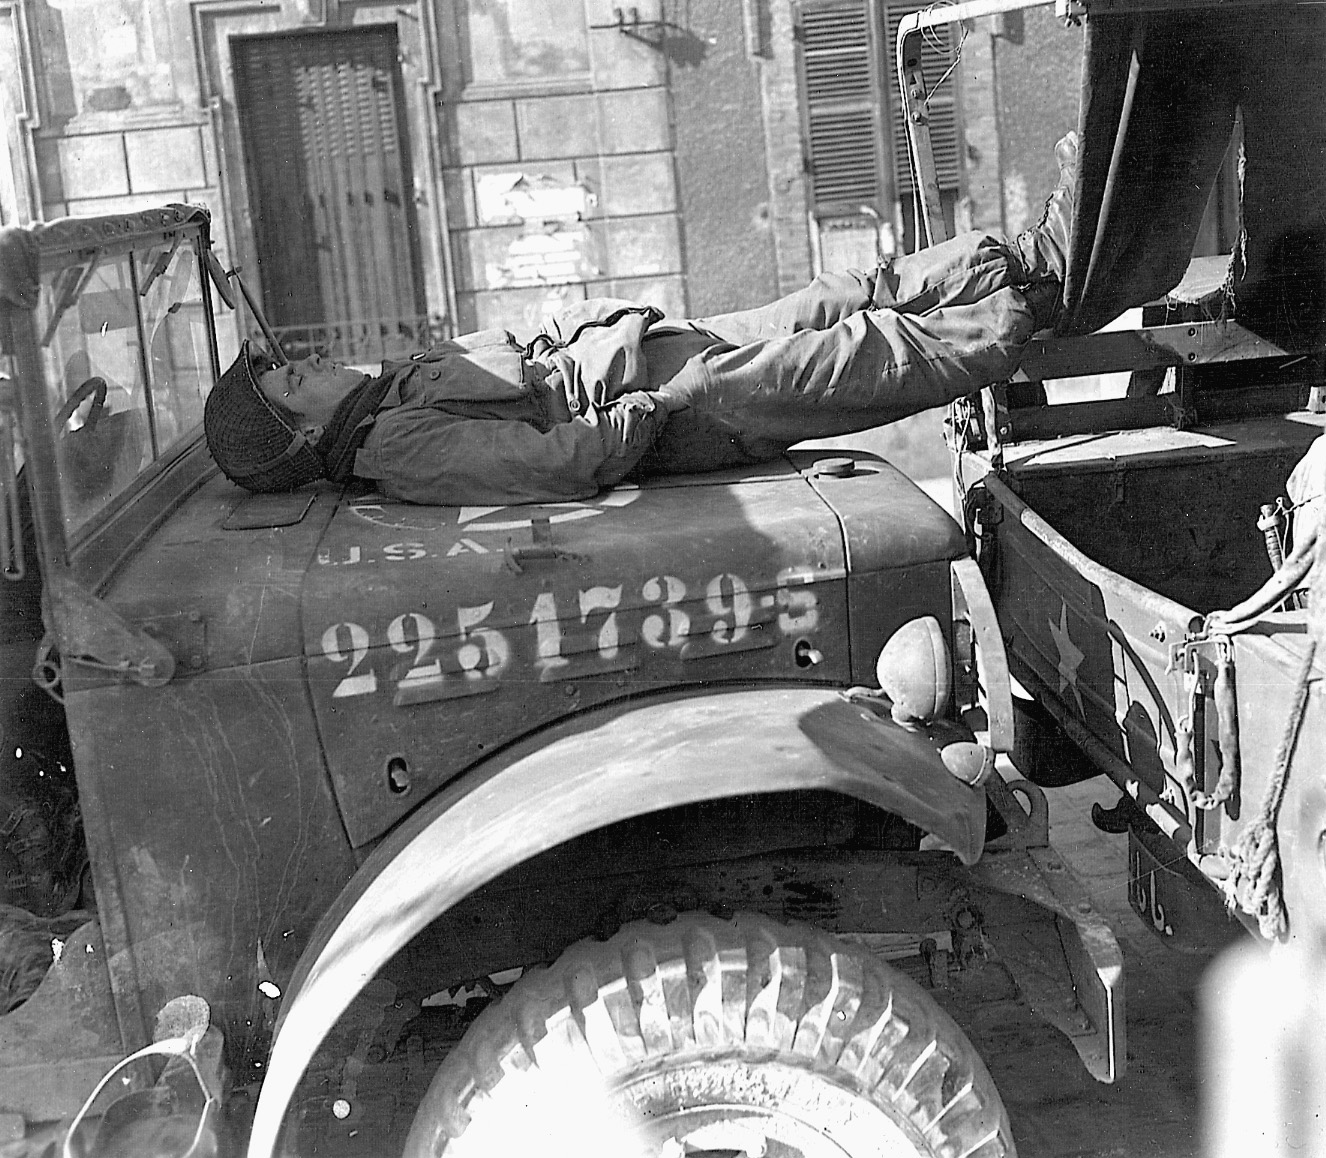 A paratrooper of the 17th Airborne uses the hood of a weapons carrier for an impromptu bed.